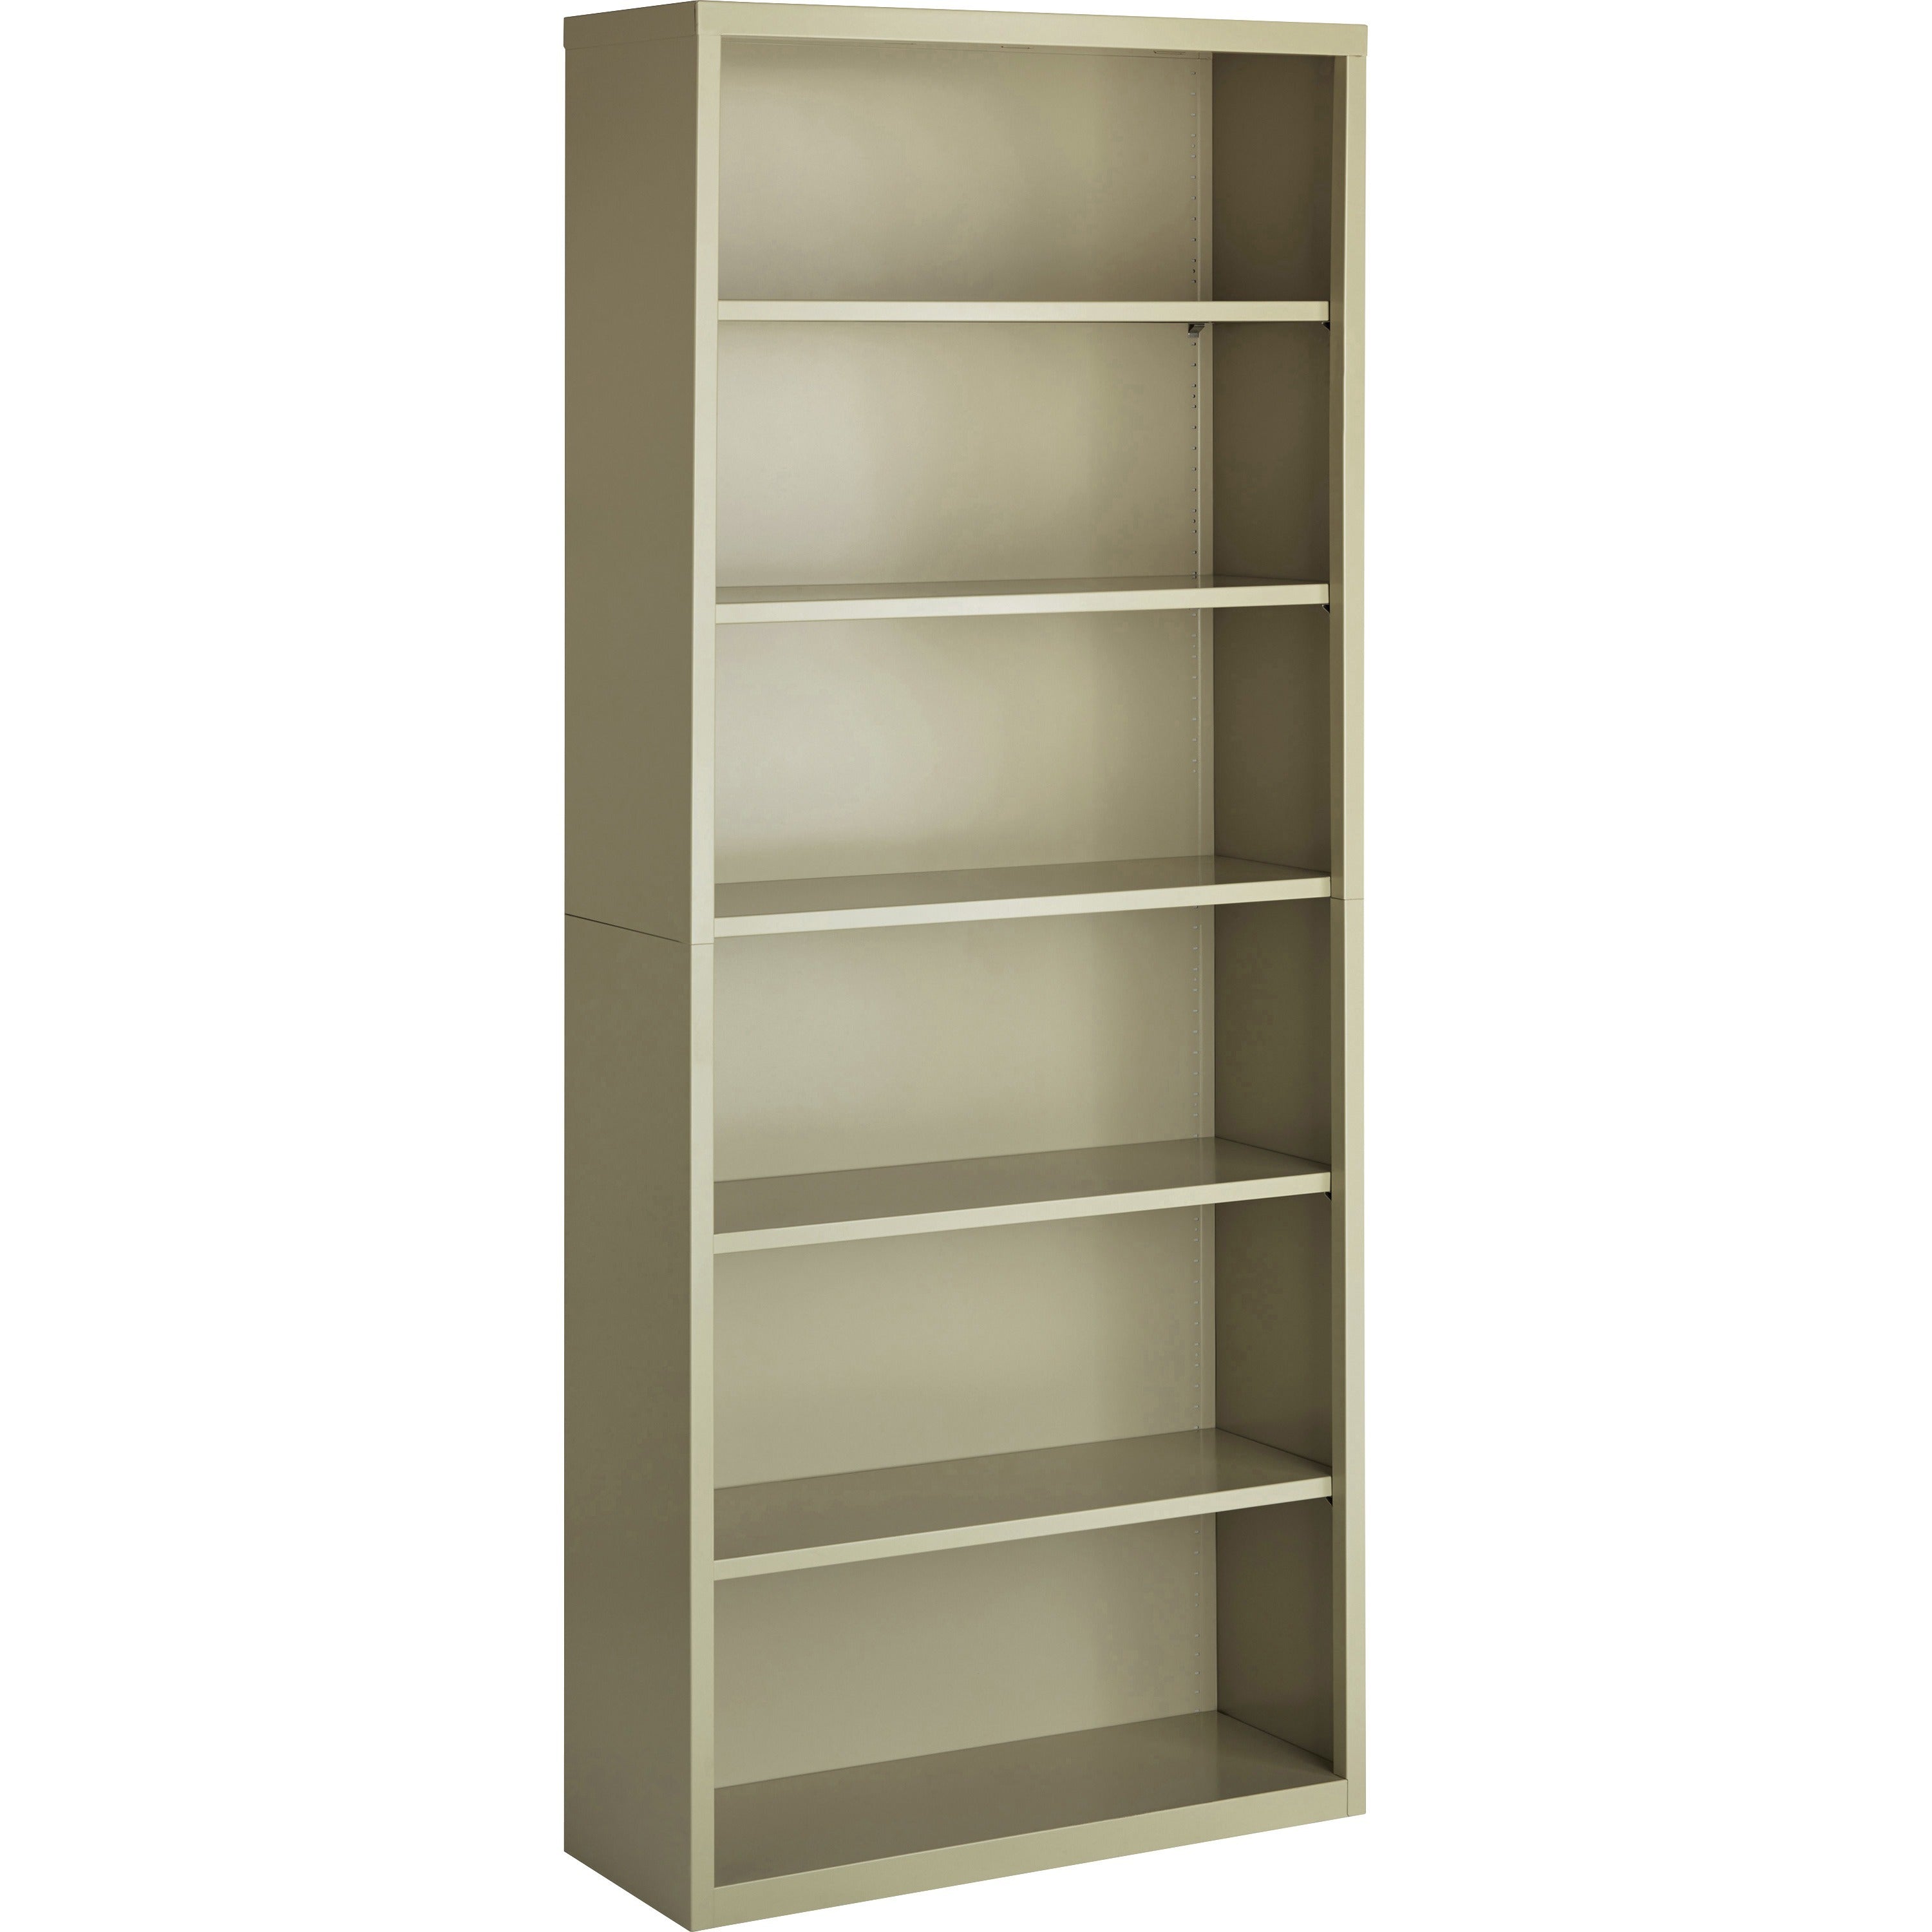 Lorell Fortress Series Bookcase - 34.5" x 13" x 82" - 6 x Shelf(ves) - Putty - Powder Coated - Steel - Recycled - 